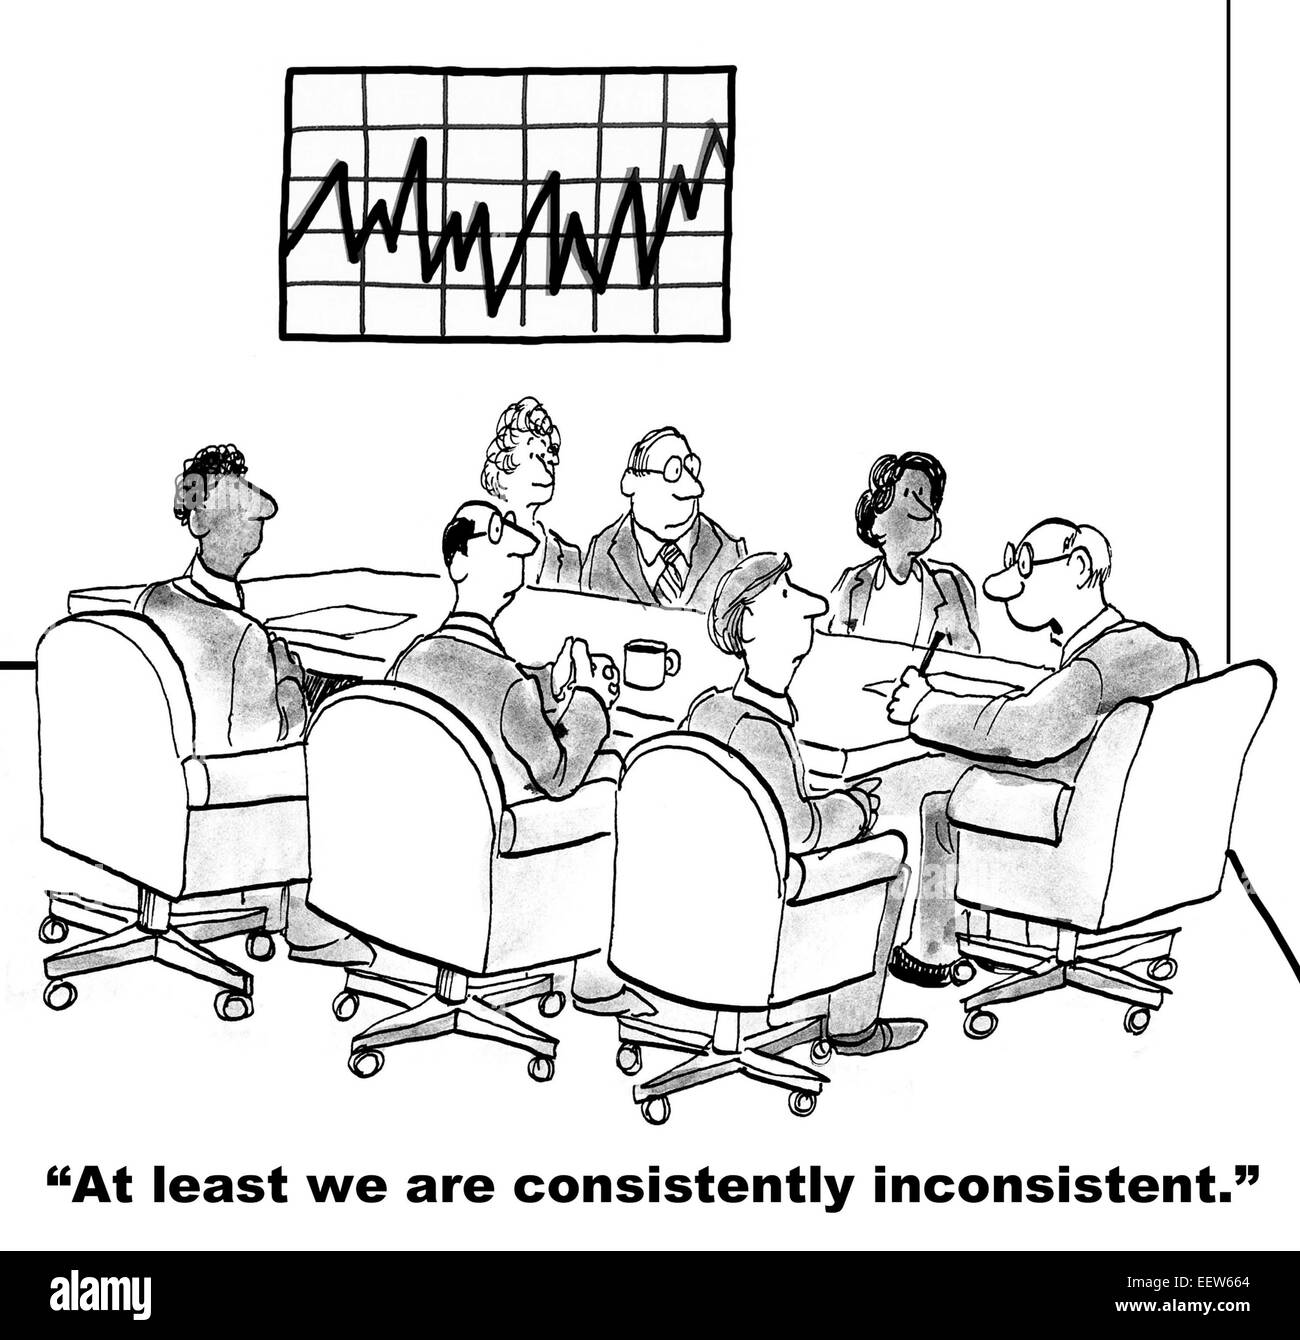 Cartoon of business meeting with chart showing inconsistent results, boss says 'we are consistently inconsistent'. Stock Photo